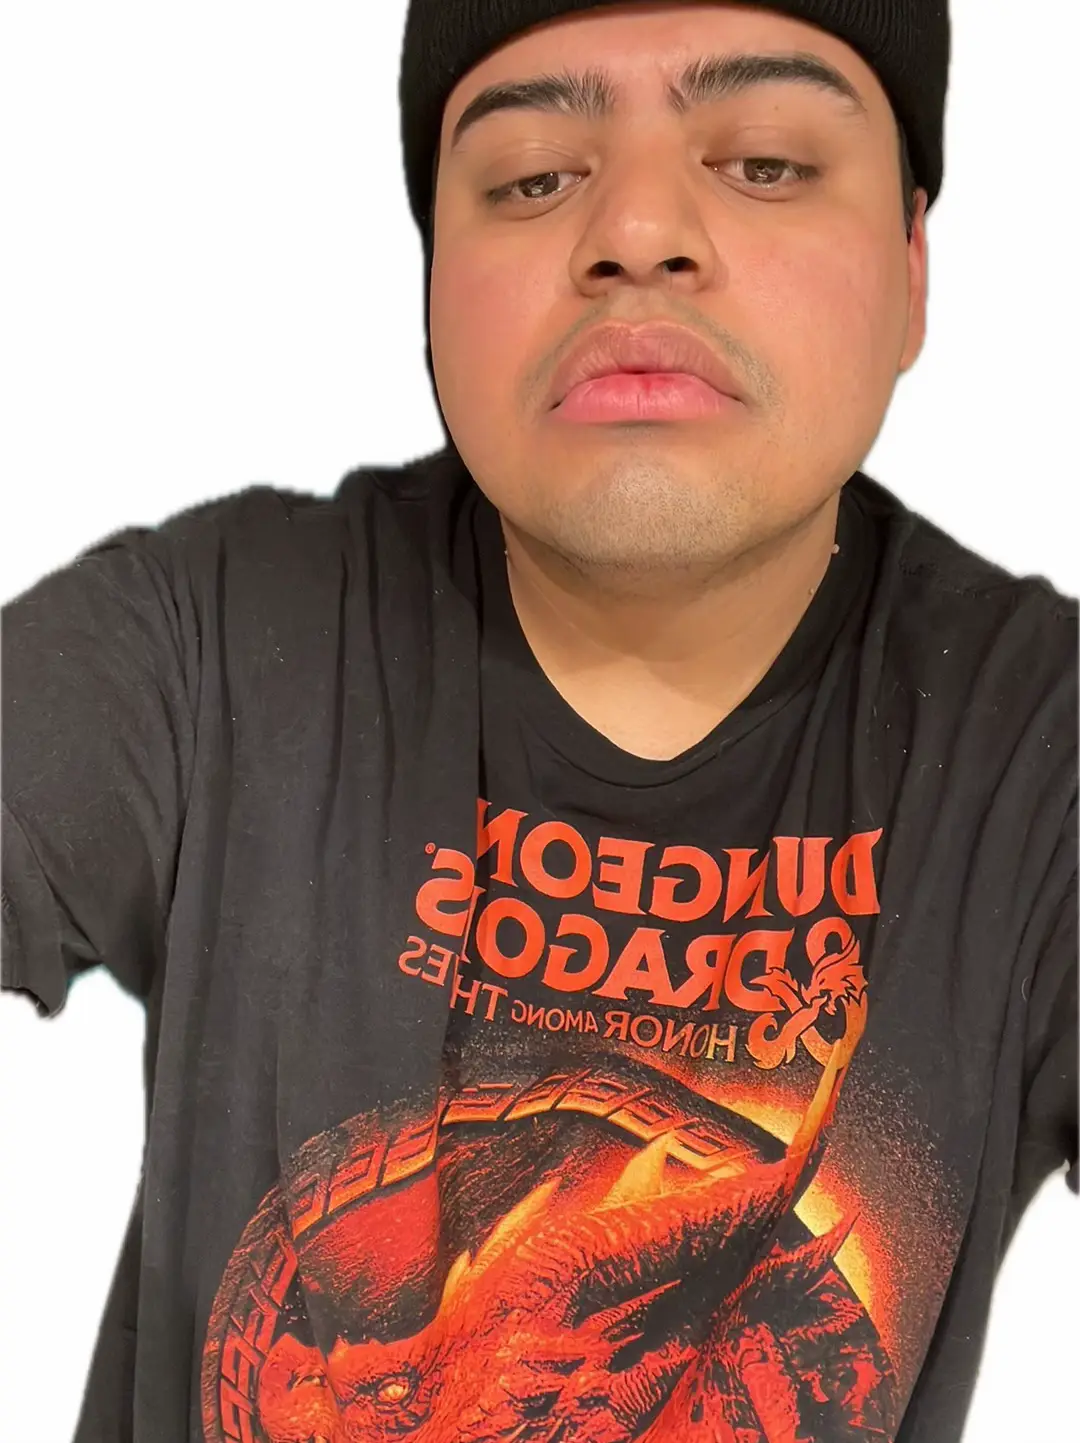  A man wearing a black shirt with a dragon on it.